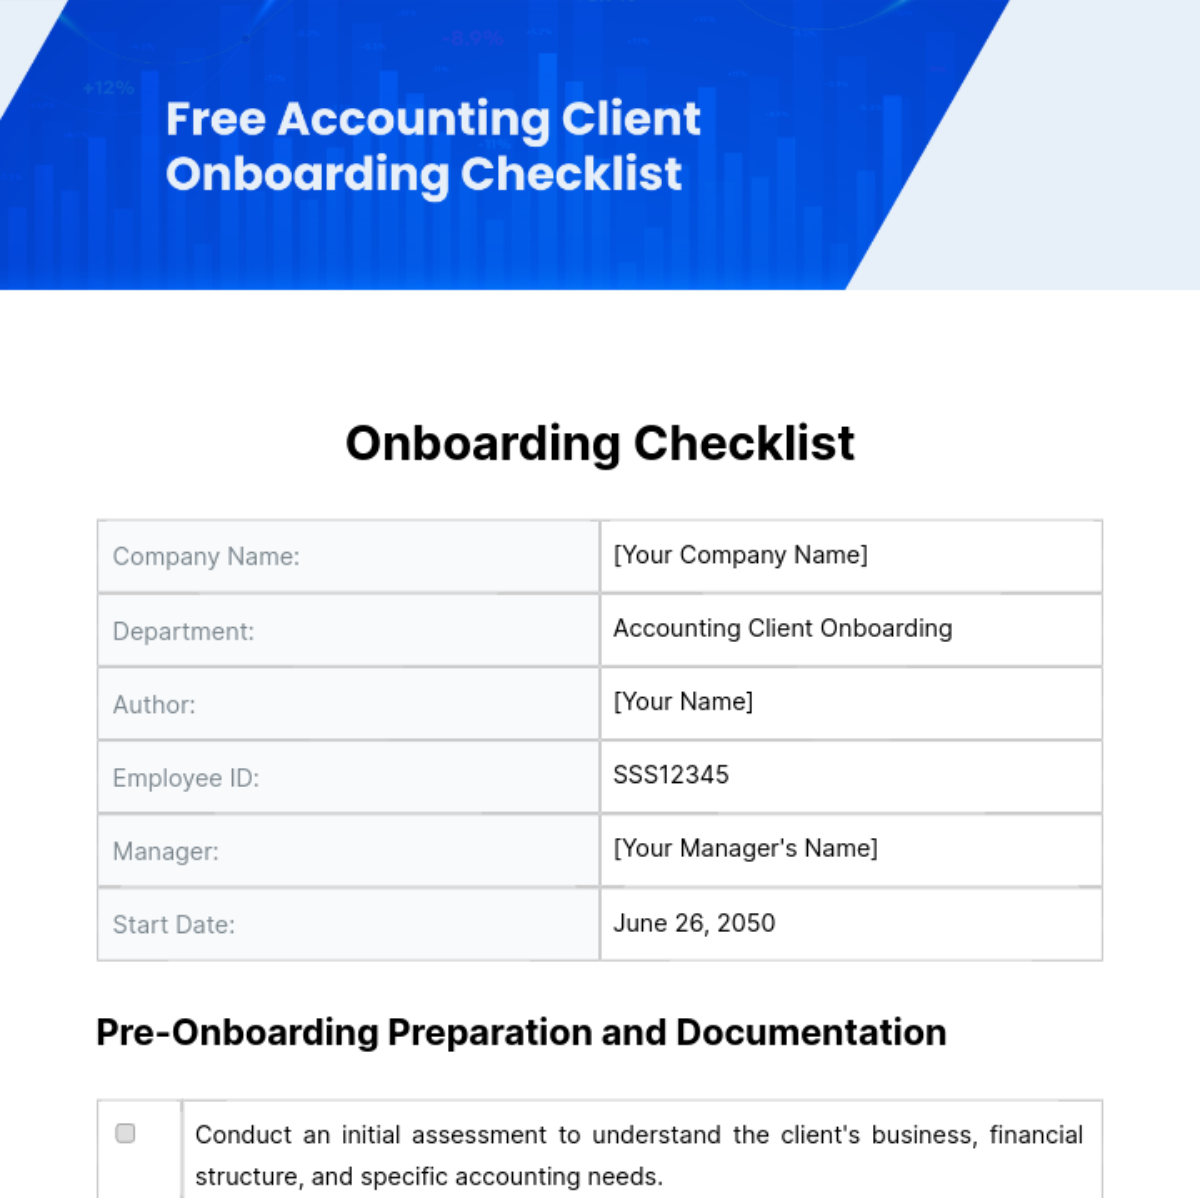 Free Accounting Client Onboarding Checklist Template